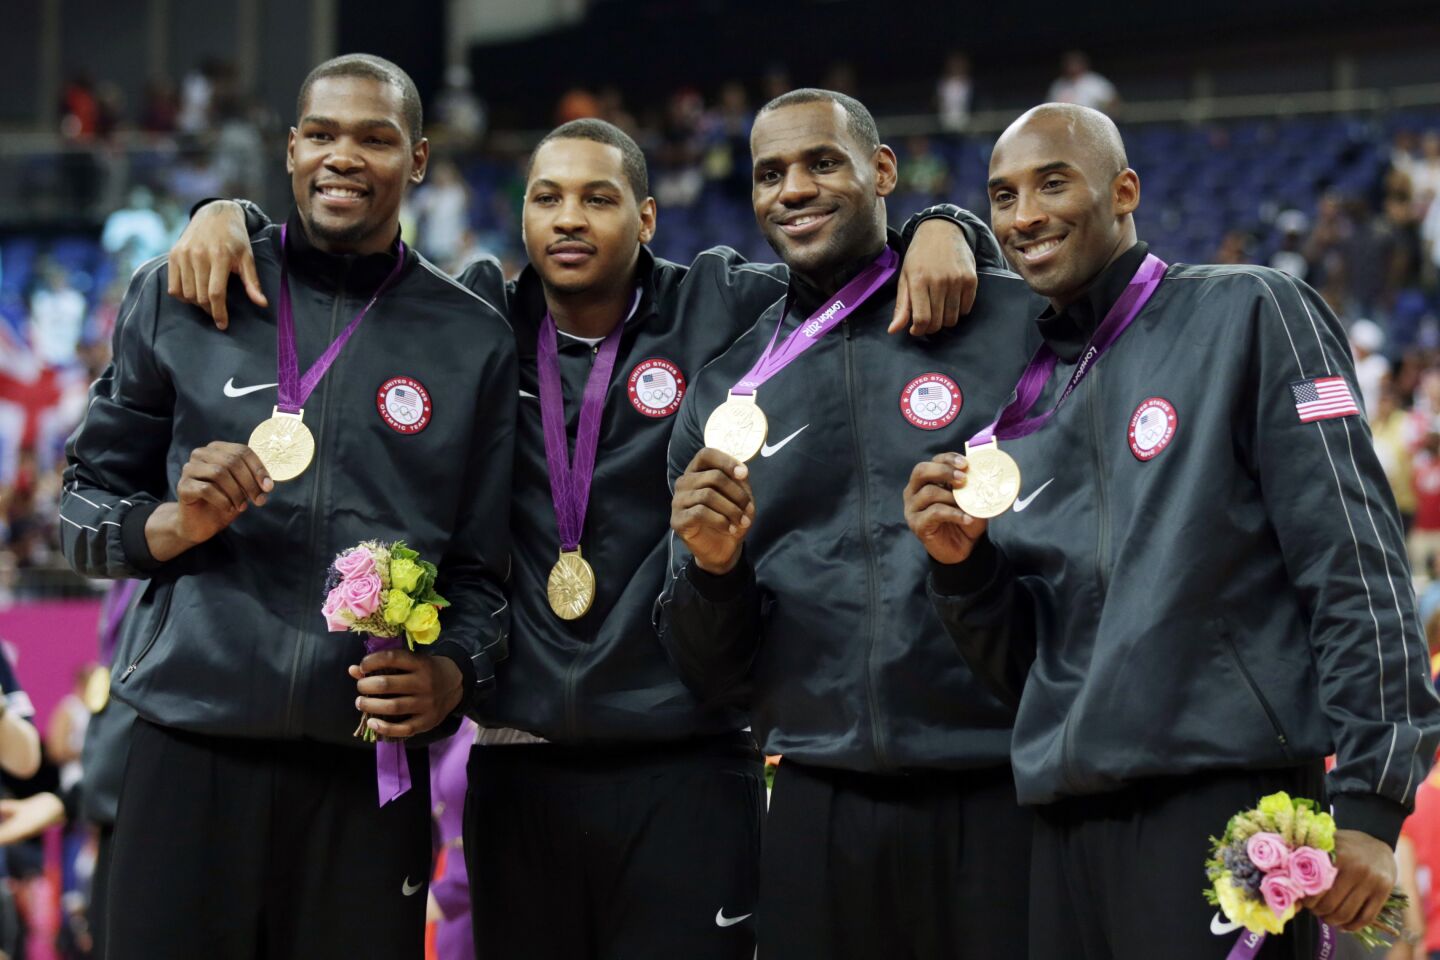 Team USA players, from left, Kevin Durant, Carmelo Anthony, LeBron James and Kobe Bryant with their gold medals at the 2012 Olympics.